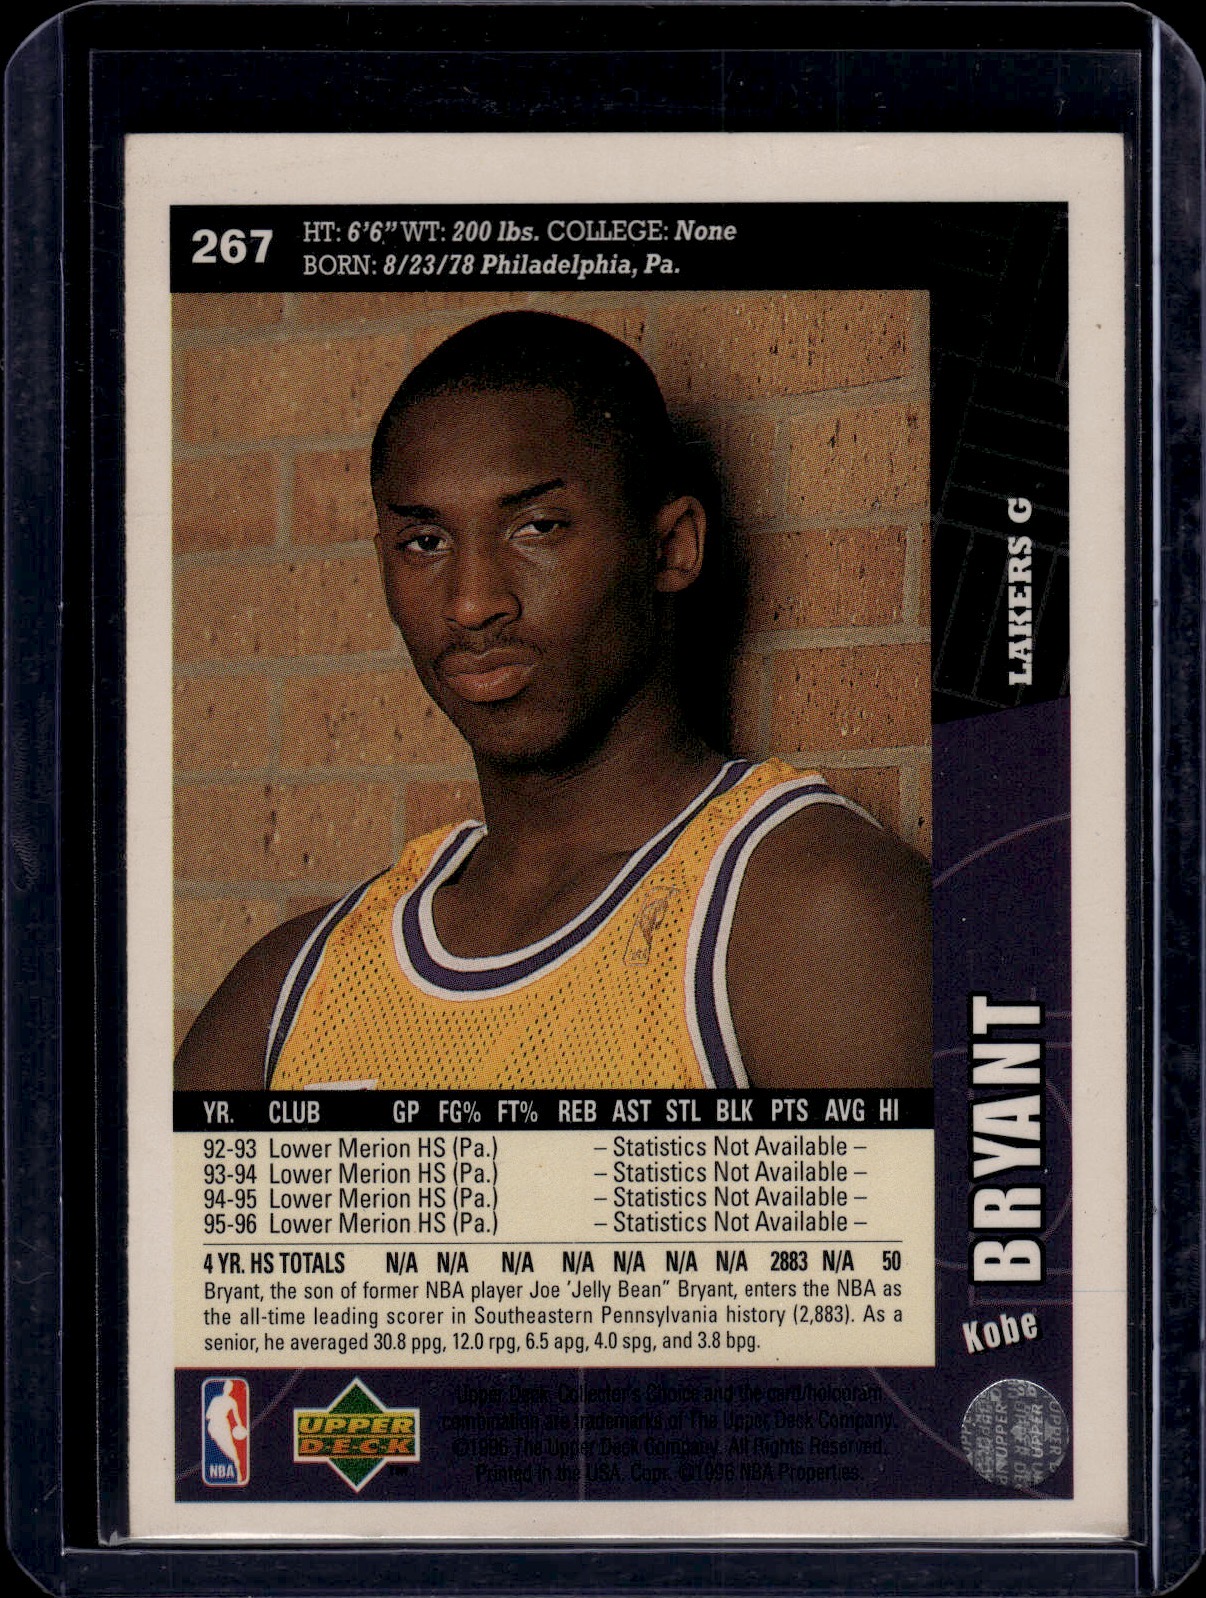 Sold at Auction: KOBE BRYANT 1996 Upper Deck Rookie Basketball Card